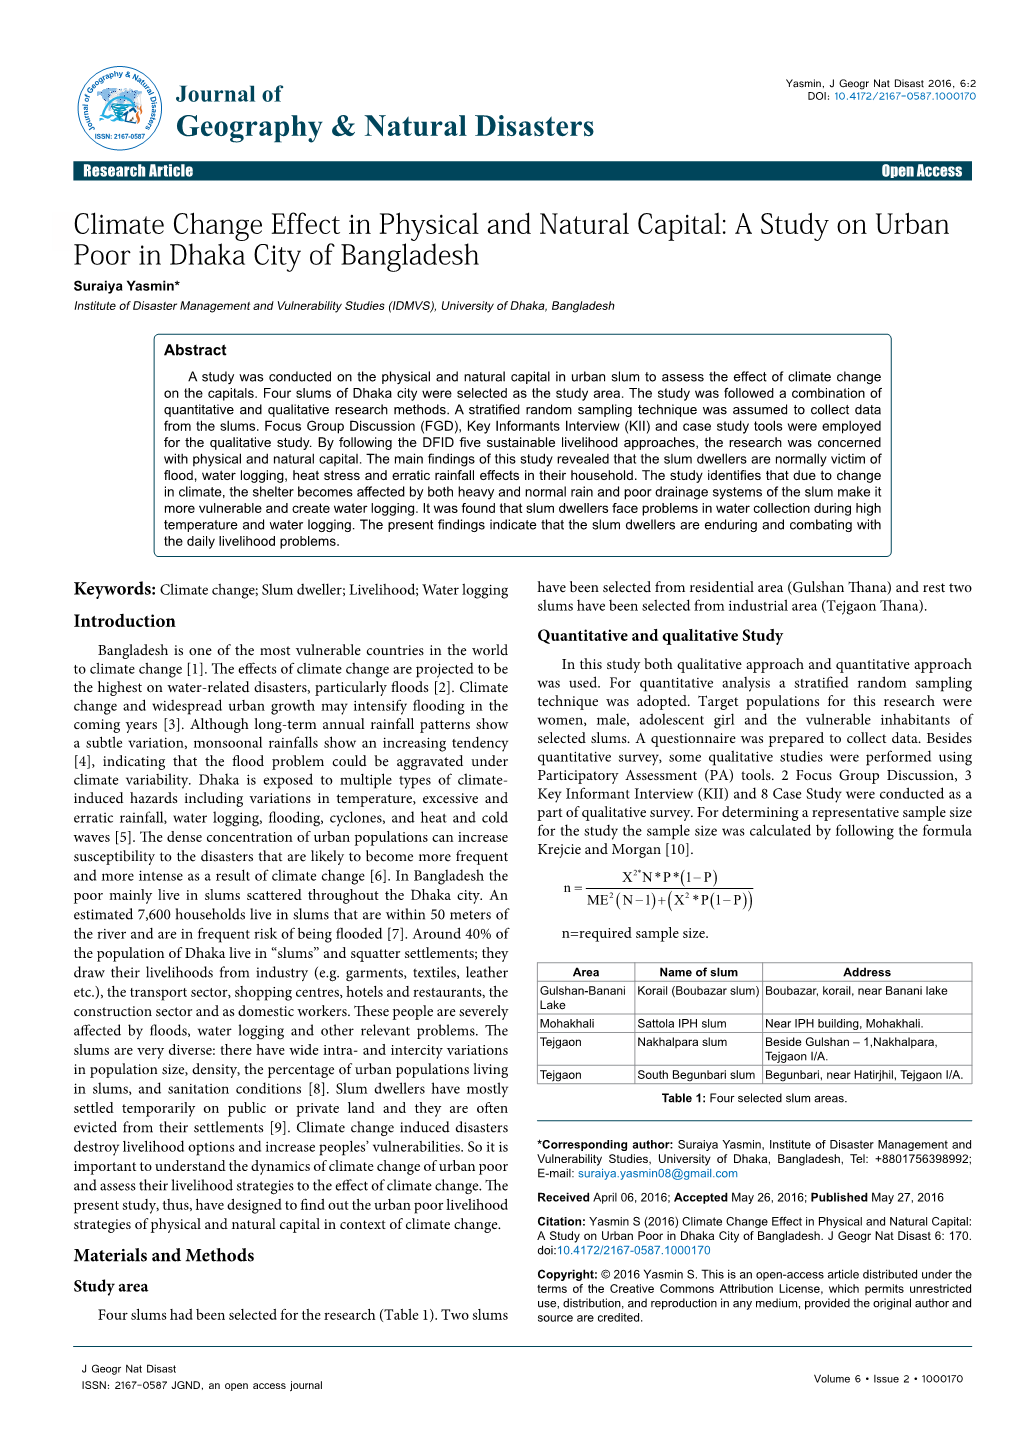 Climate Change Effect in Physical and Natural Capital: a Study on Urban